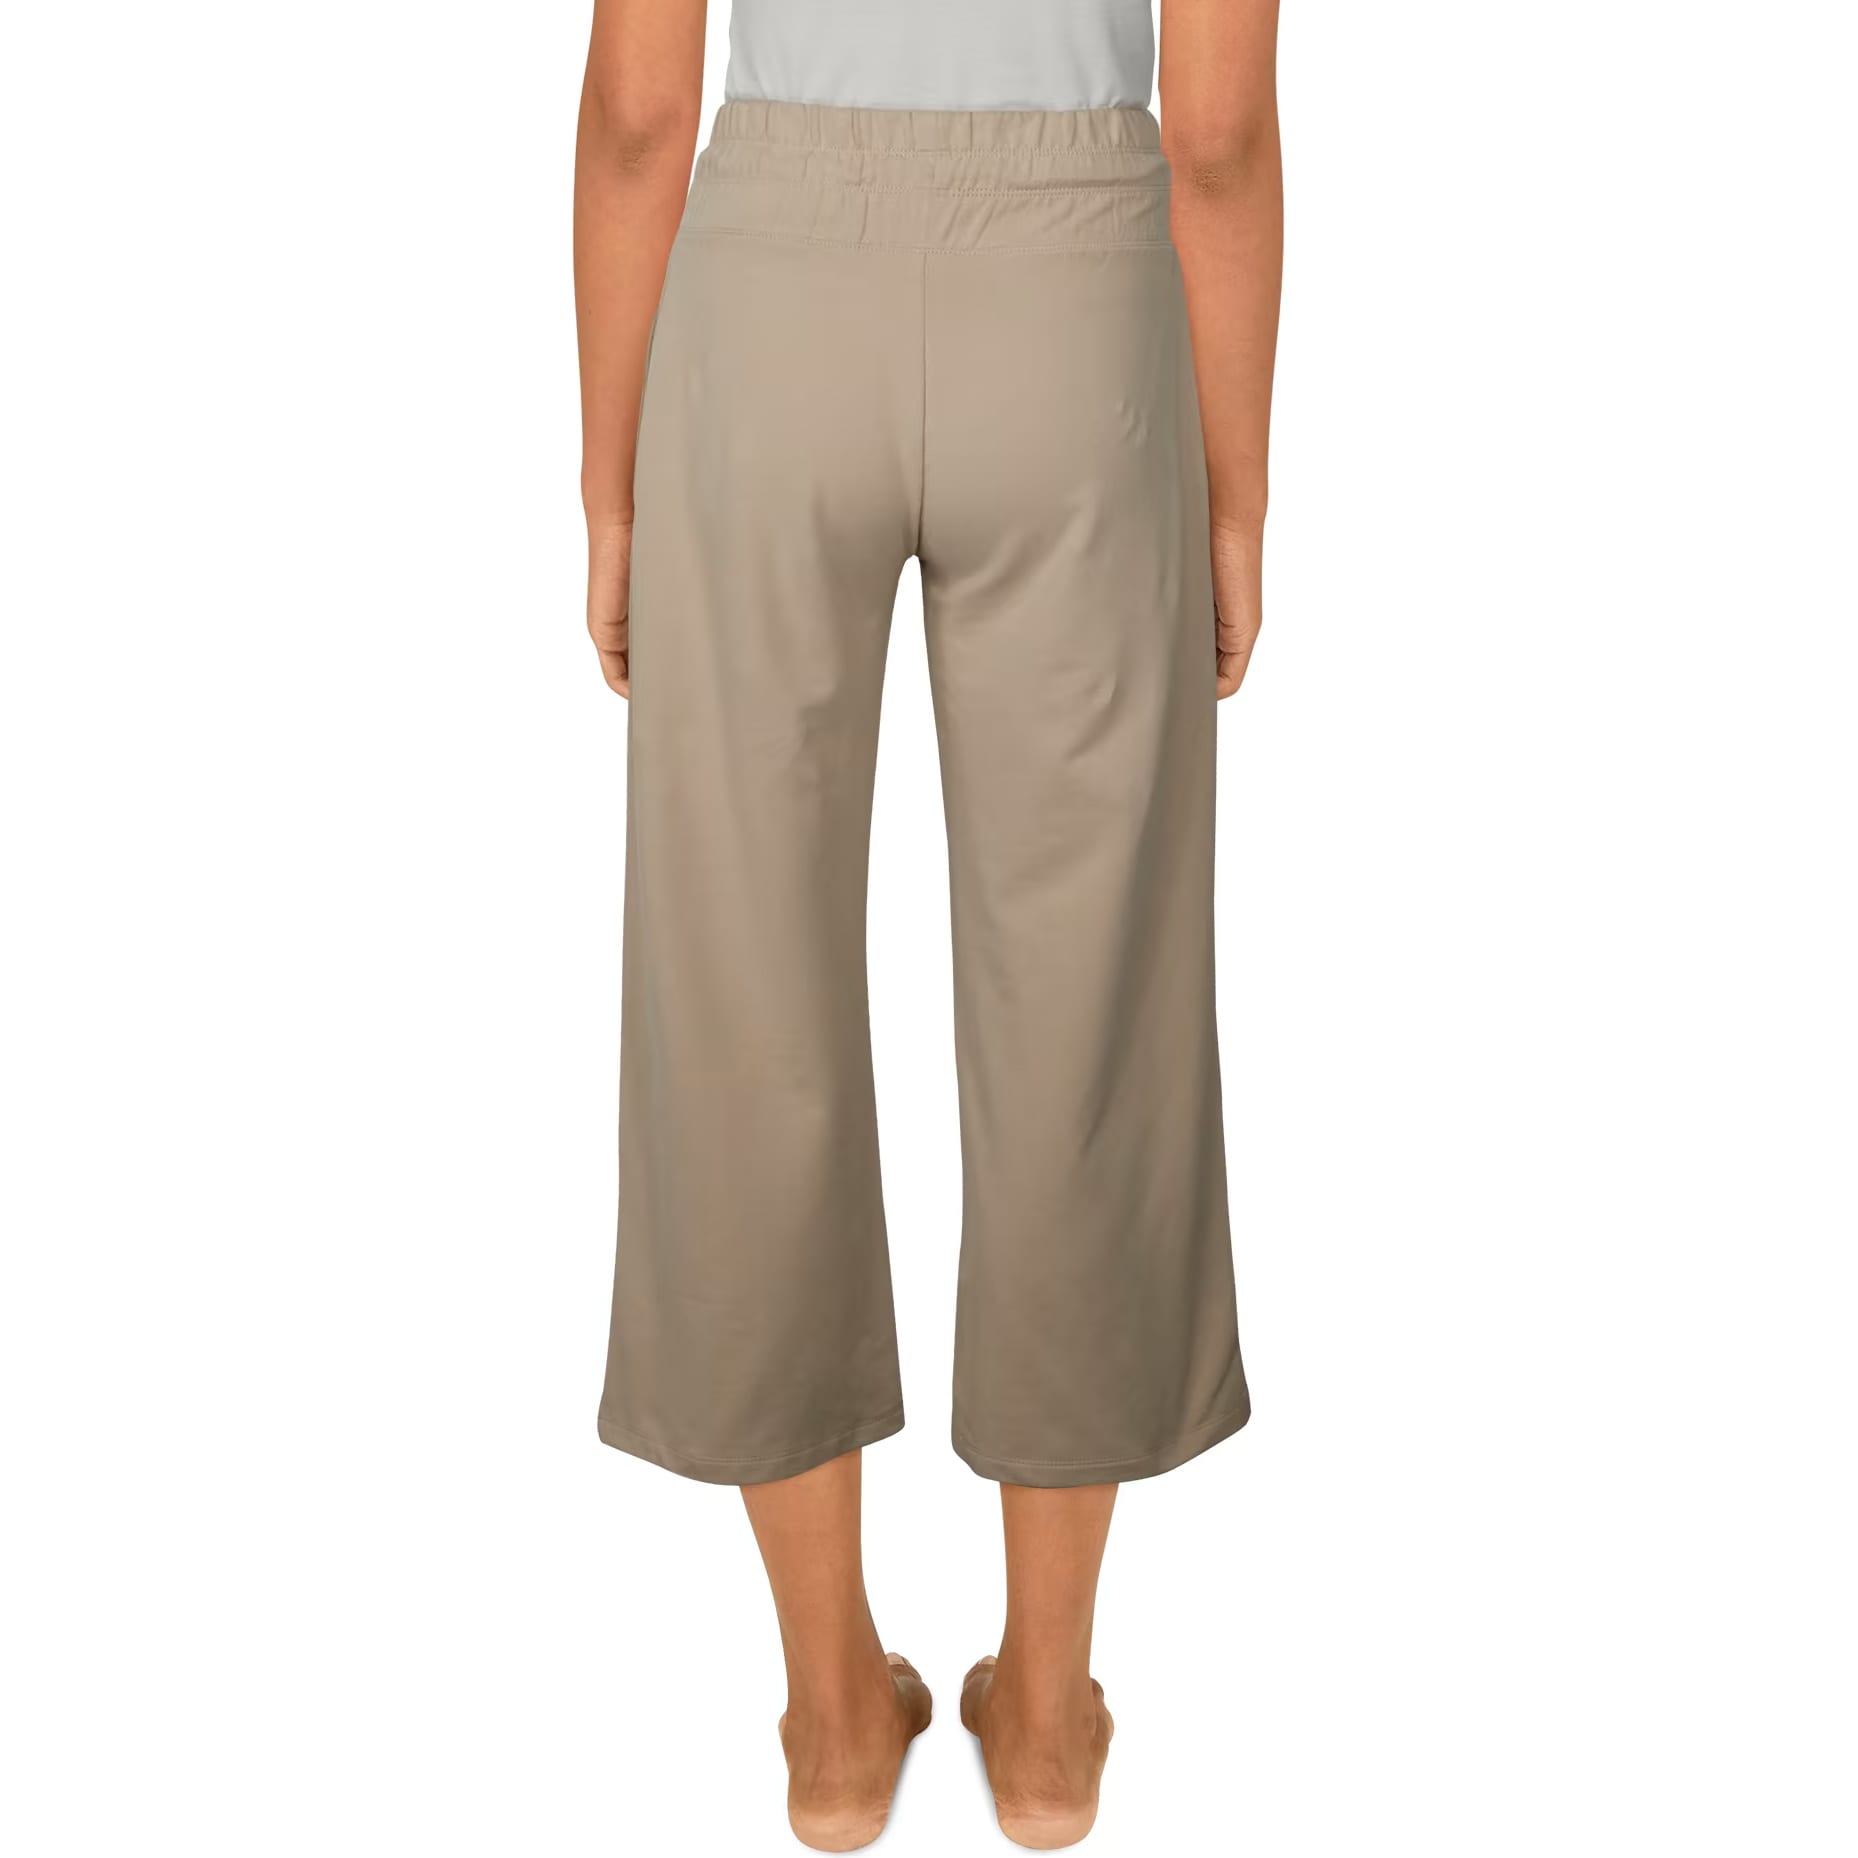 Natural Reflections Campside Skimmer Capri Pants for Ladies